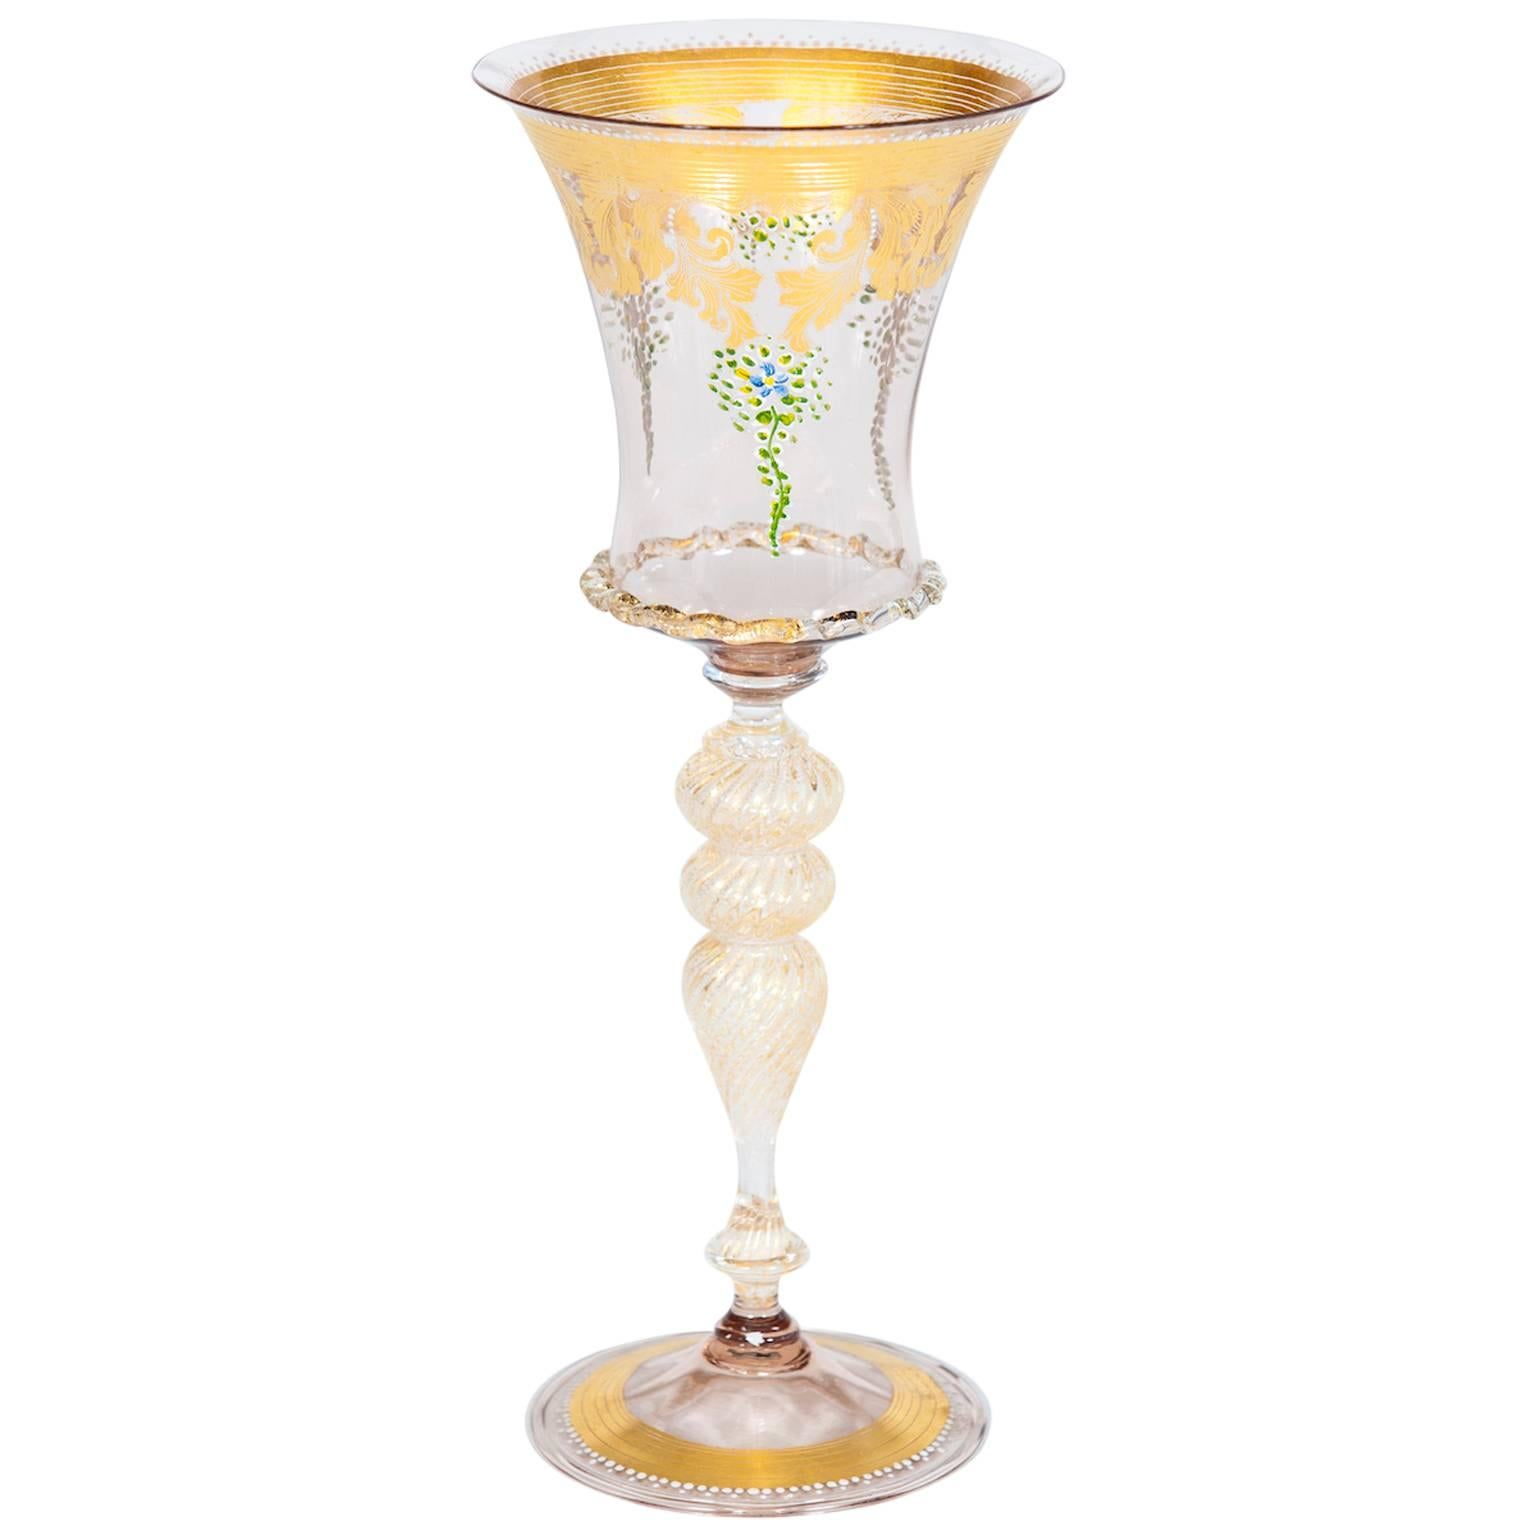 Handcrafted gold glass goblet from 1970s Murano decored with exquisite gold leaf For Sale